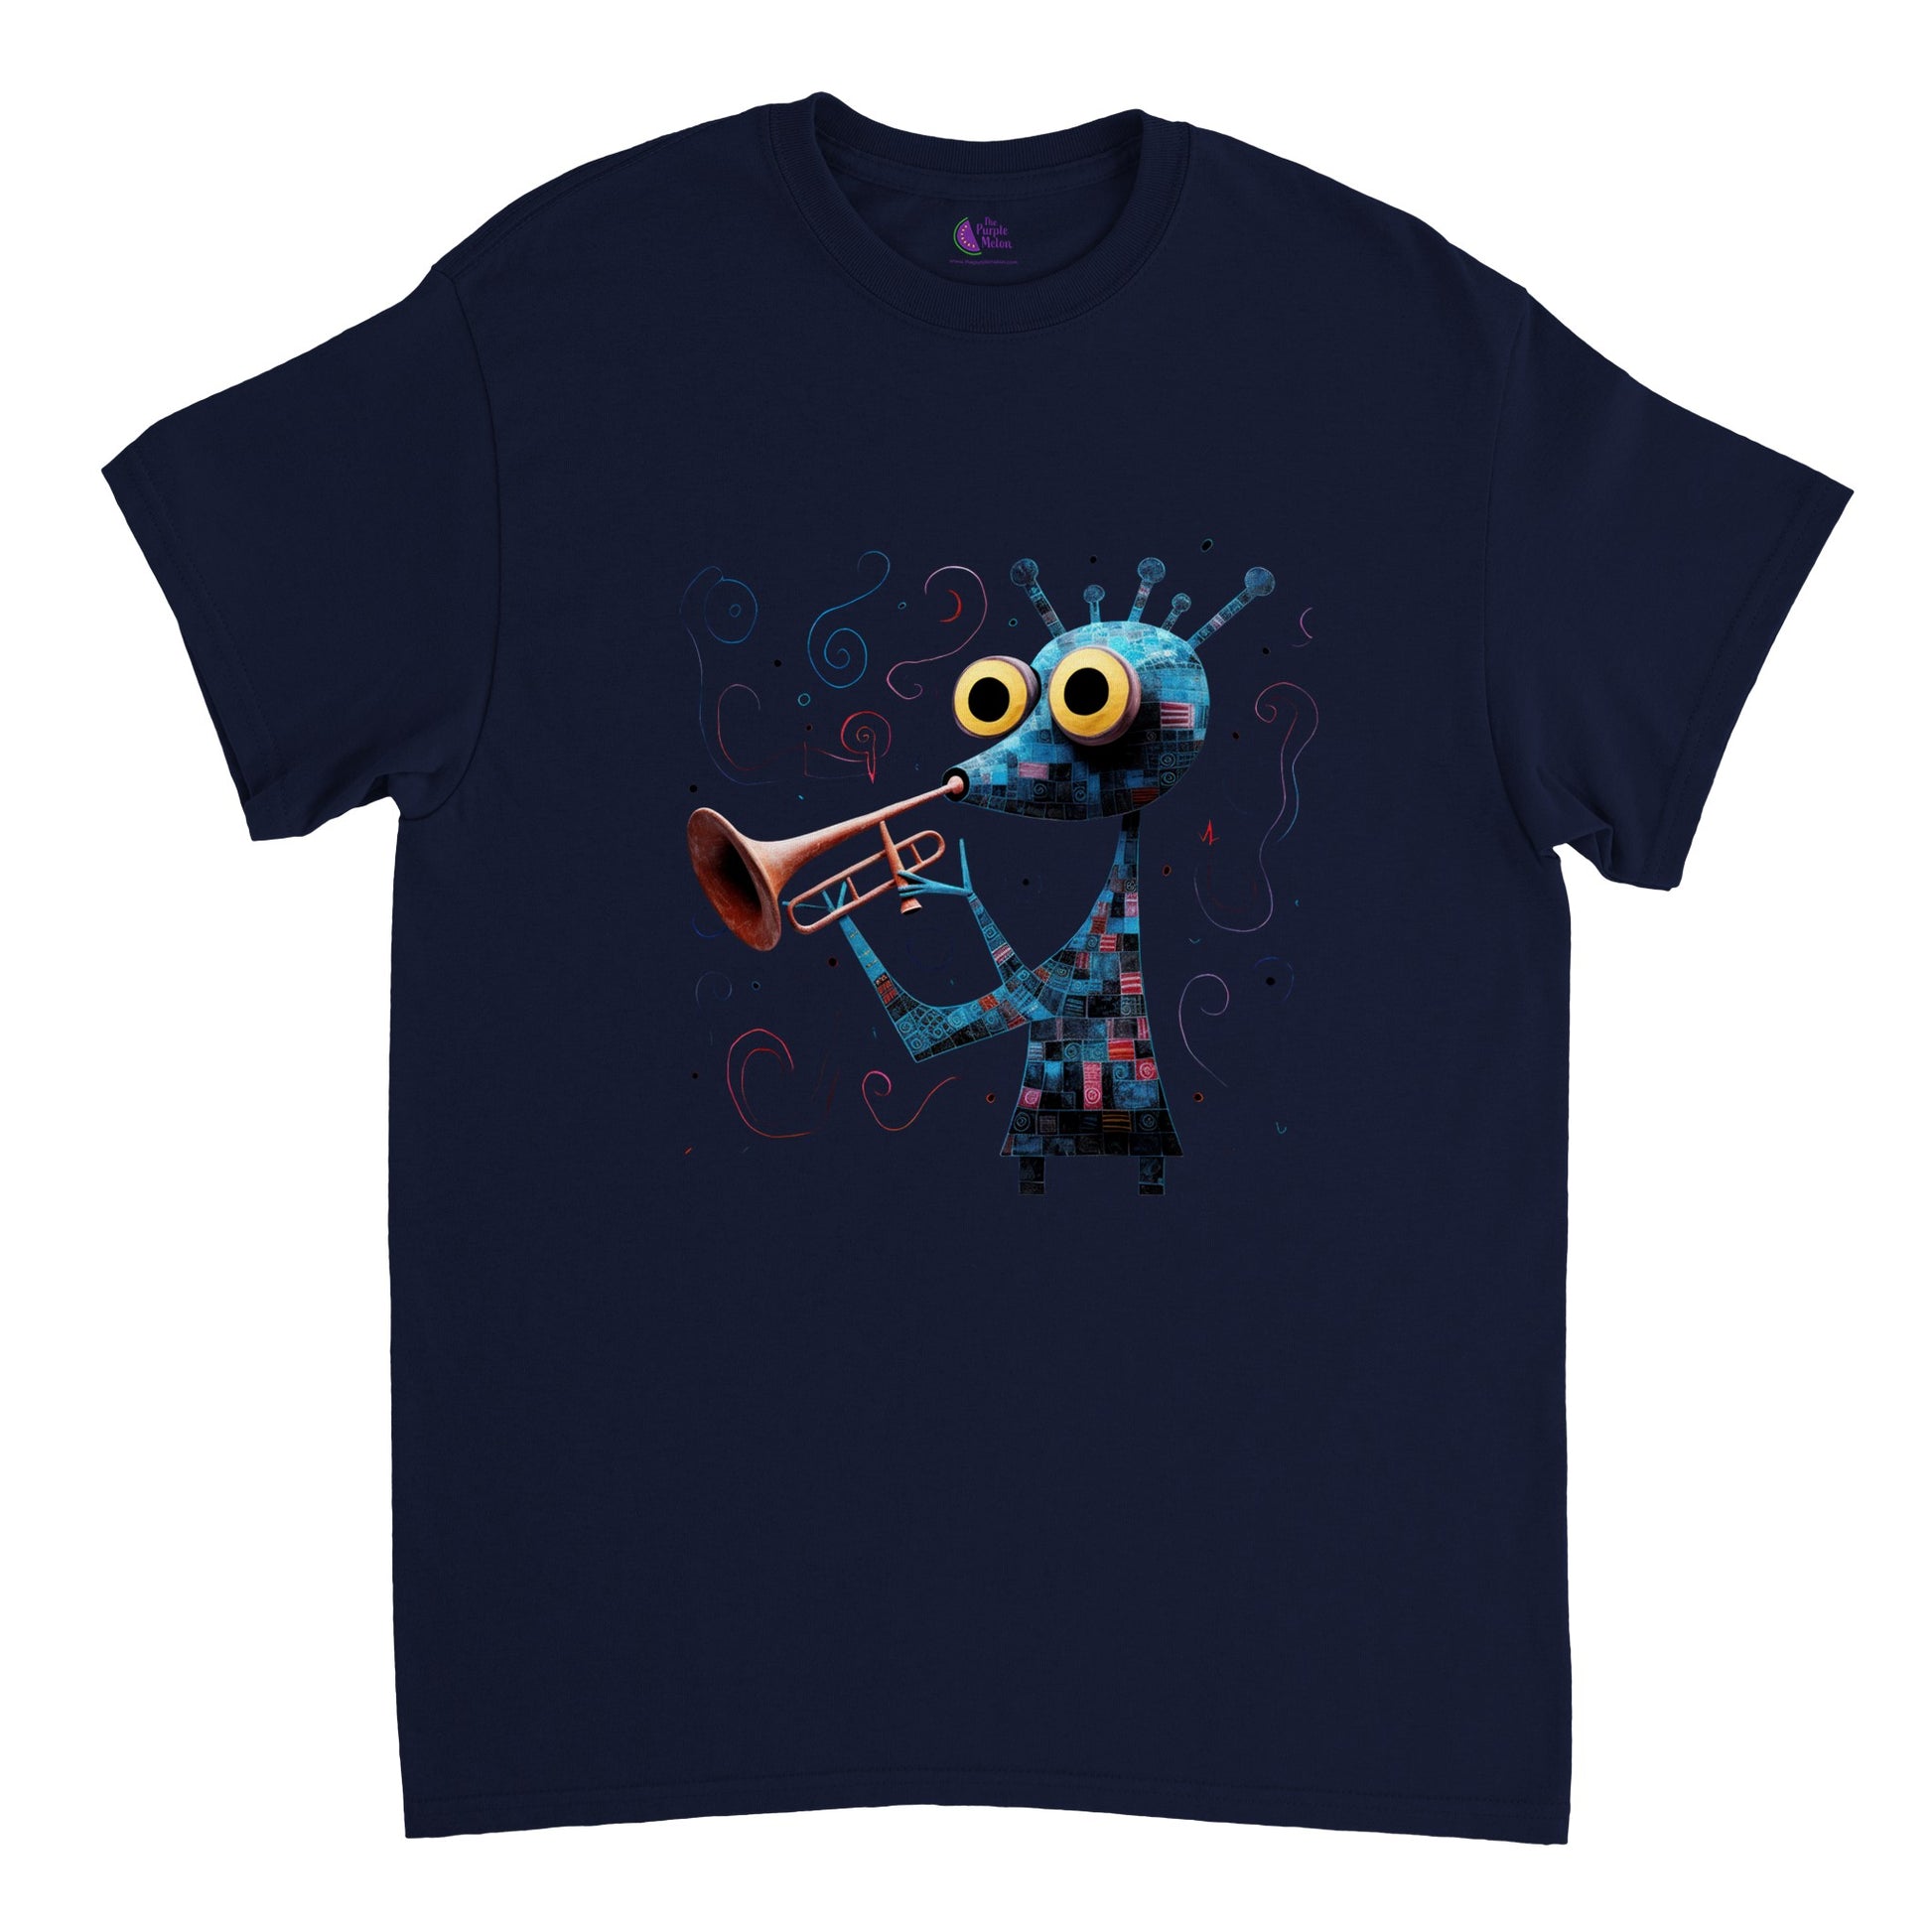 navy blue t-shirt with an abstract trumpet player print